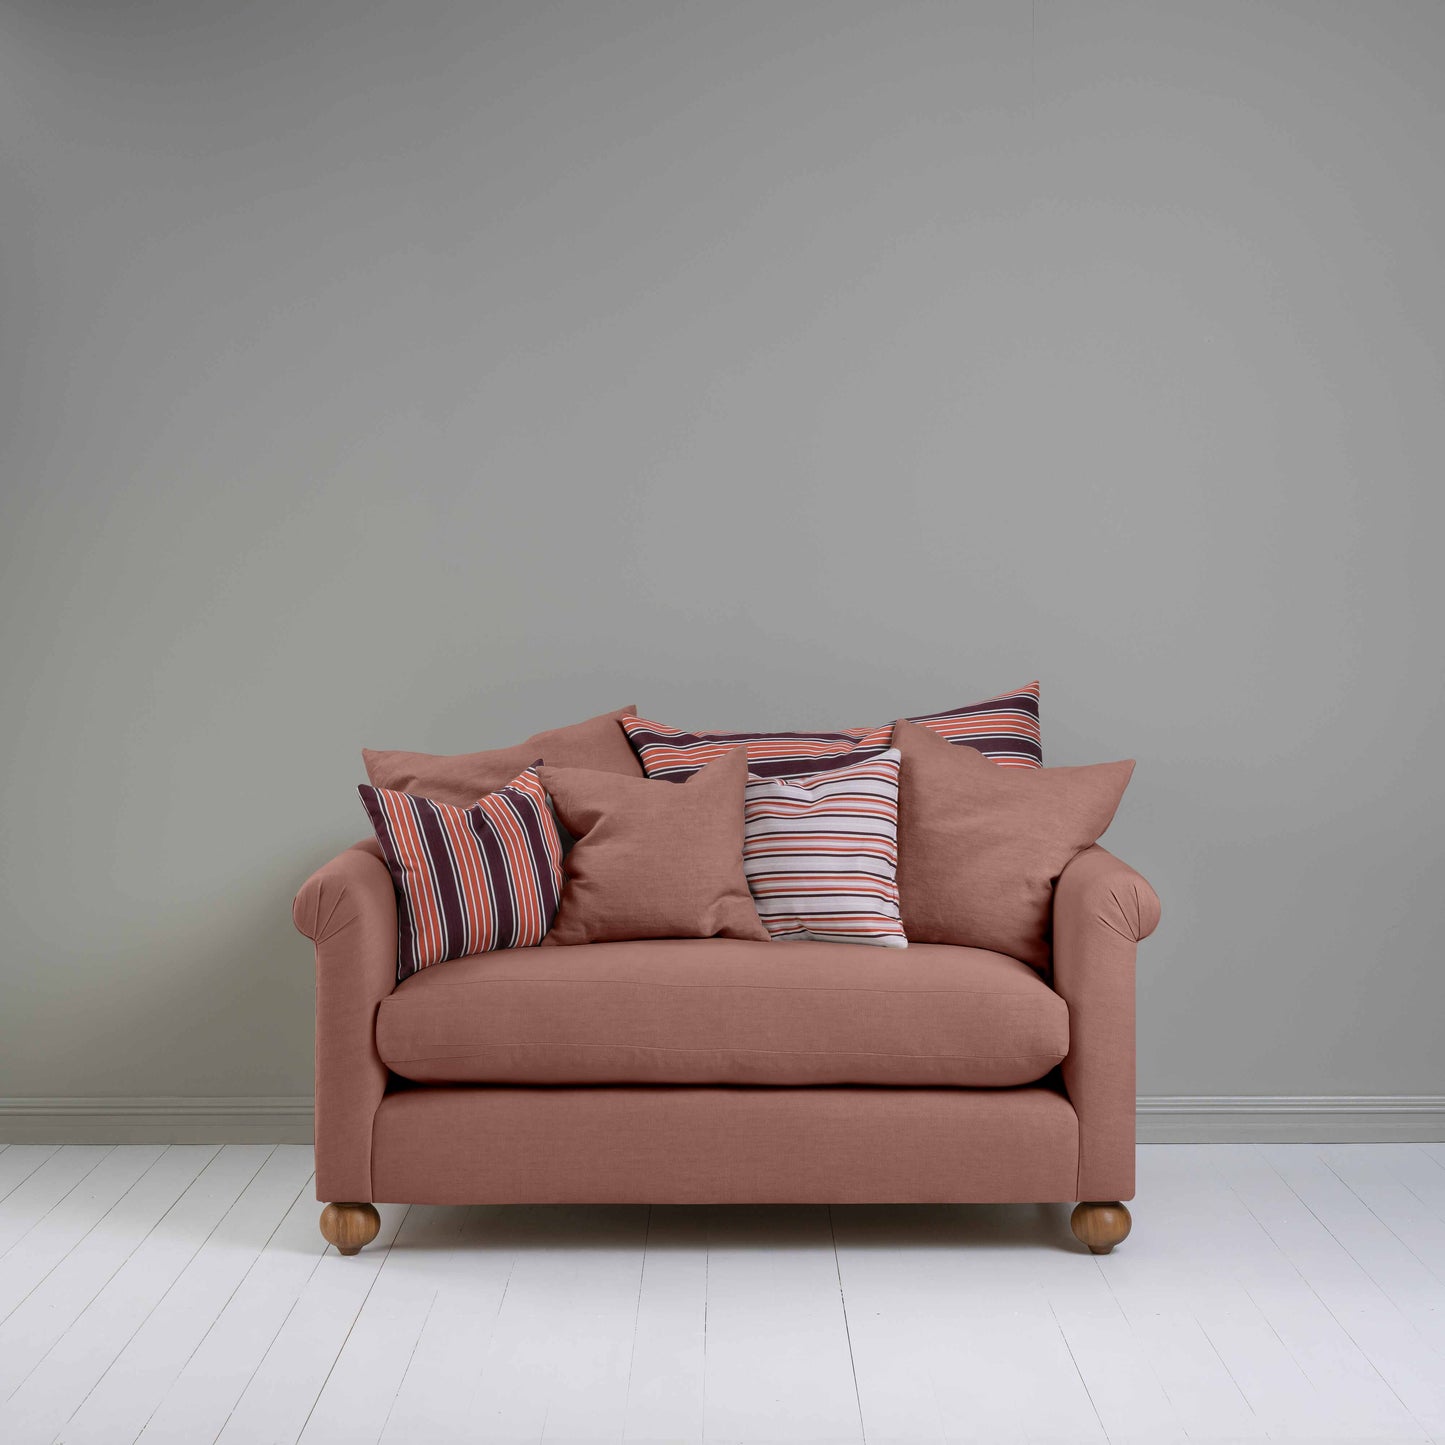 Dolittle 2 Seater Sofa in Laidback Linen Sweet Briar